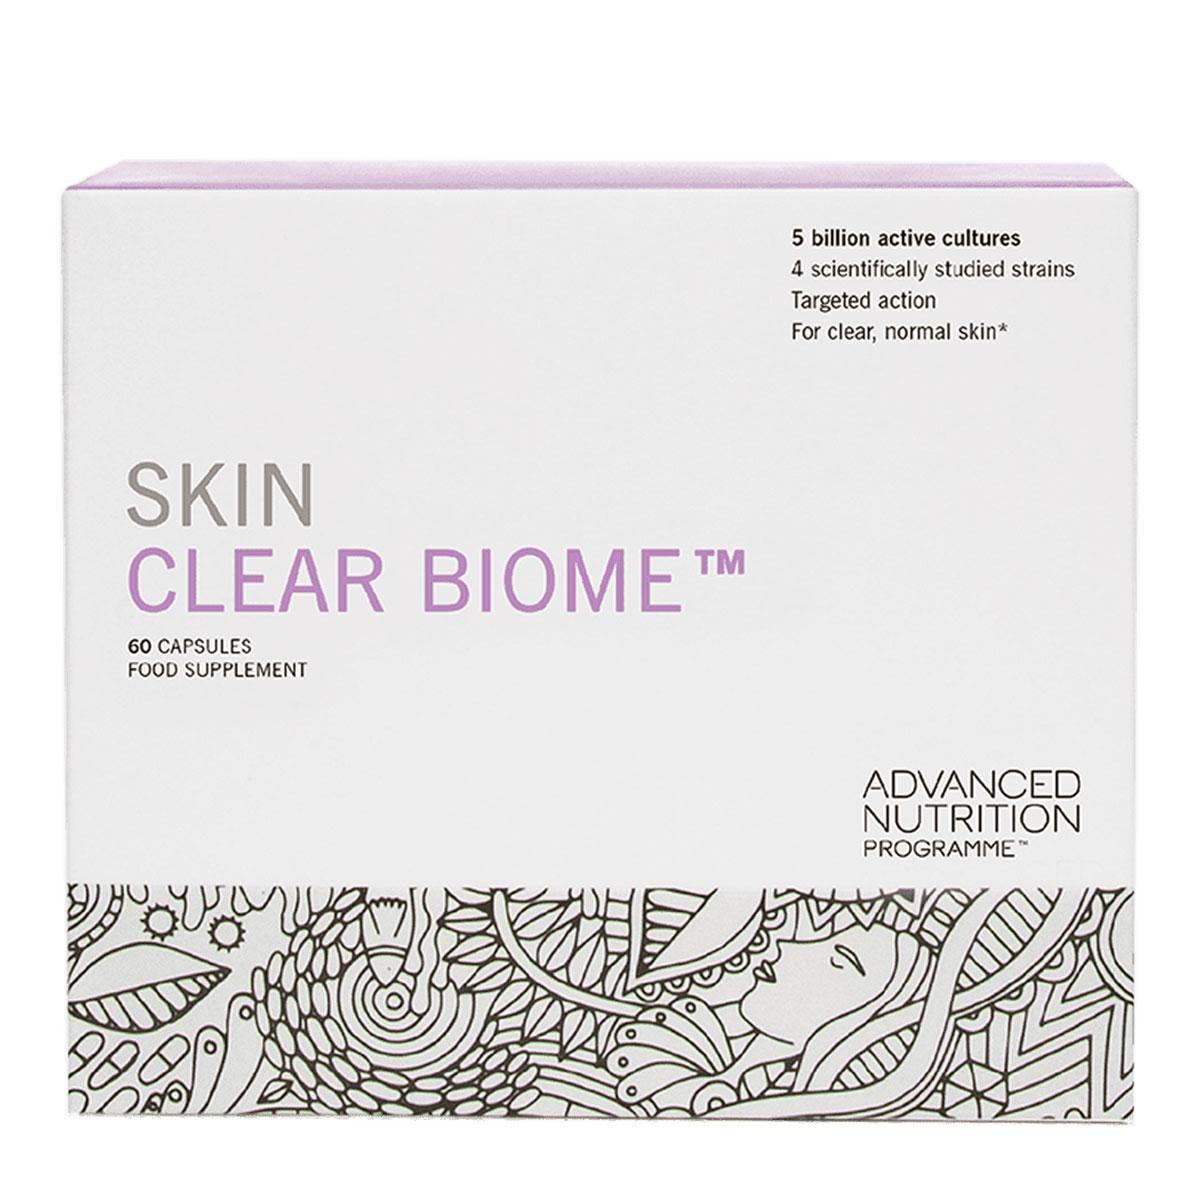 Advanced Nutrition Programme Skin Clear Biome x 10 Capsules | SEPHORA UK